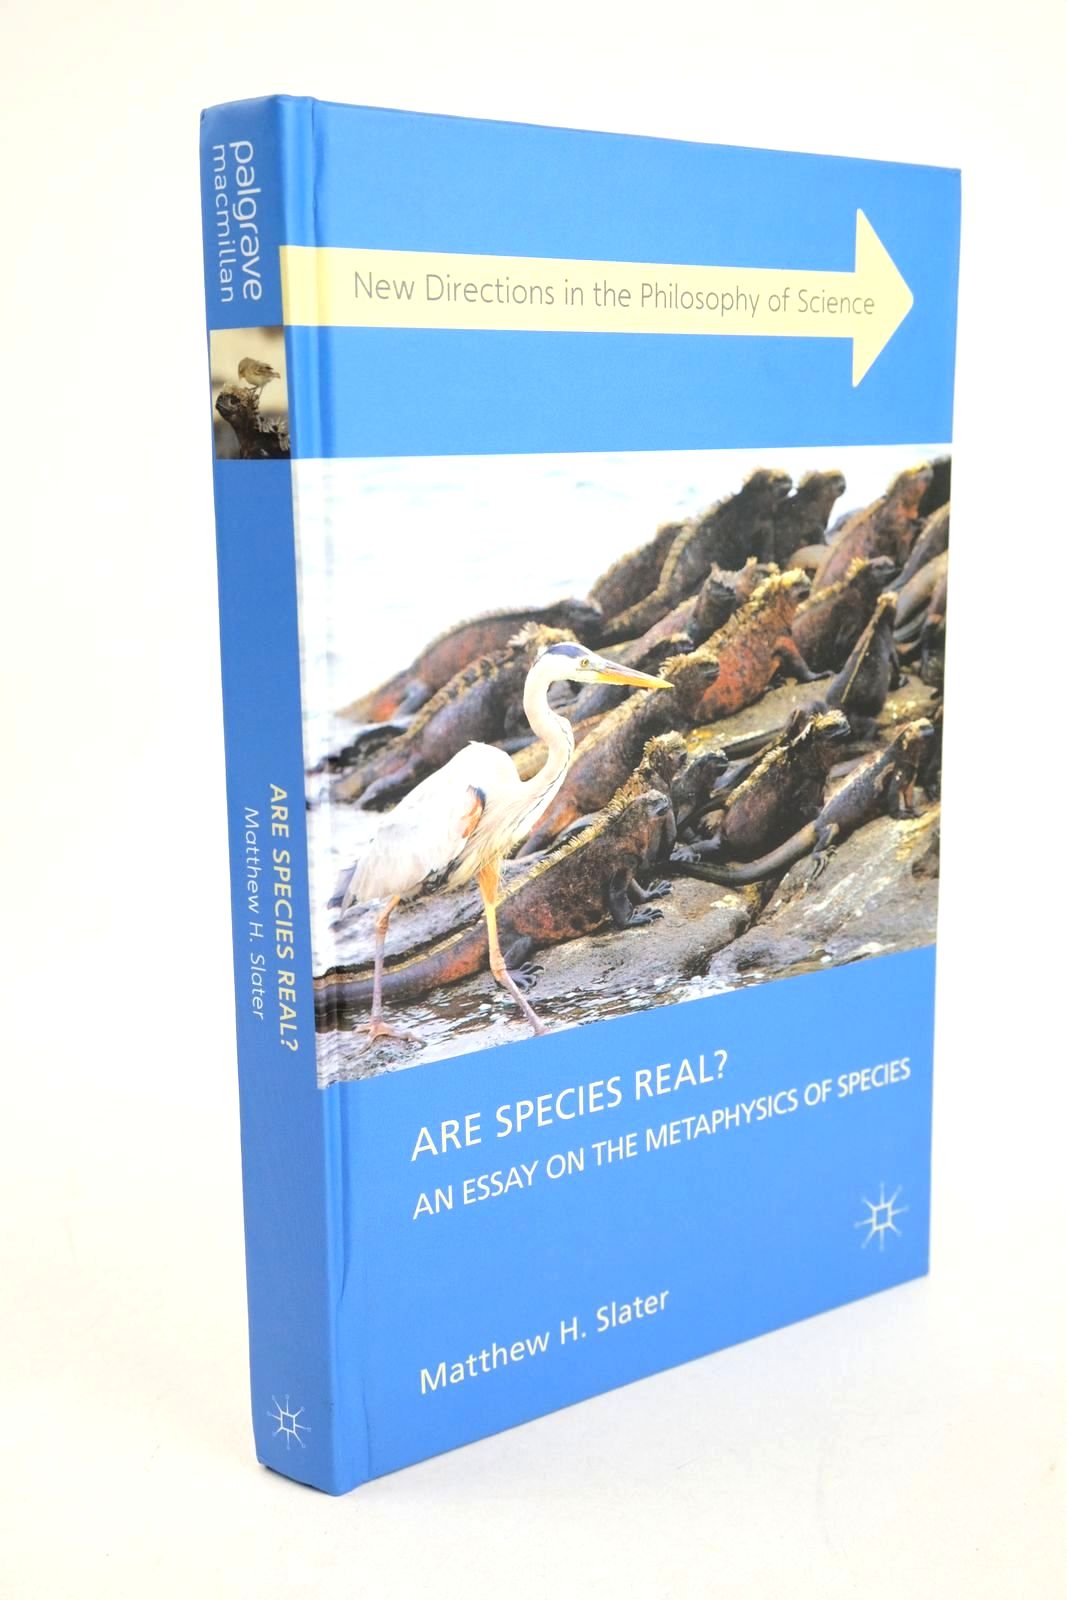 Photo of ARE SPECIES REAL? AN ESSAY ON THE METAPHYSICS OF SPECIES written by Slater, Matthew H. published by Palgrave Macmillan (STOCK CODE: 1327422)  for sale by Stella & Rose's Books